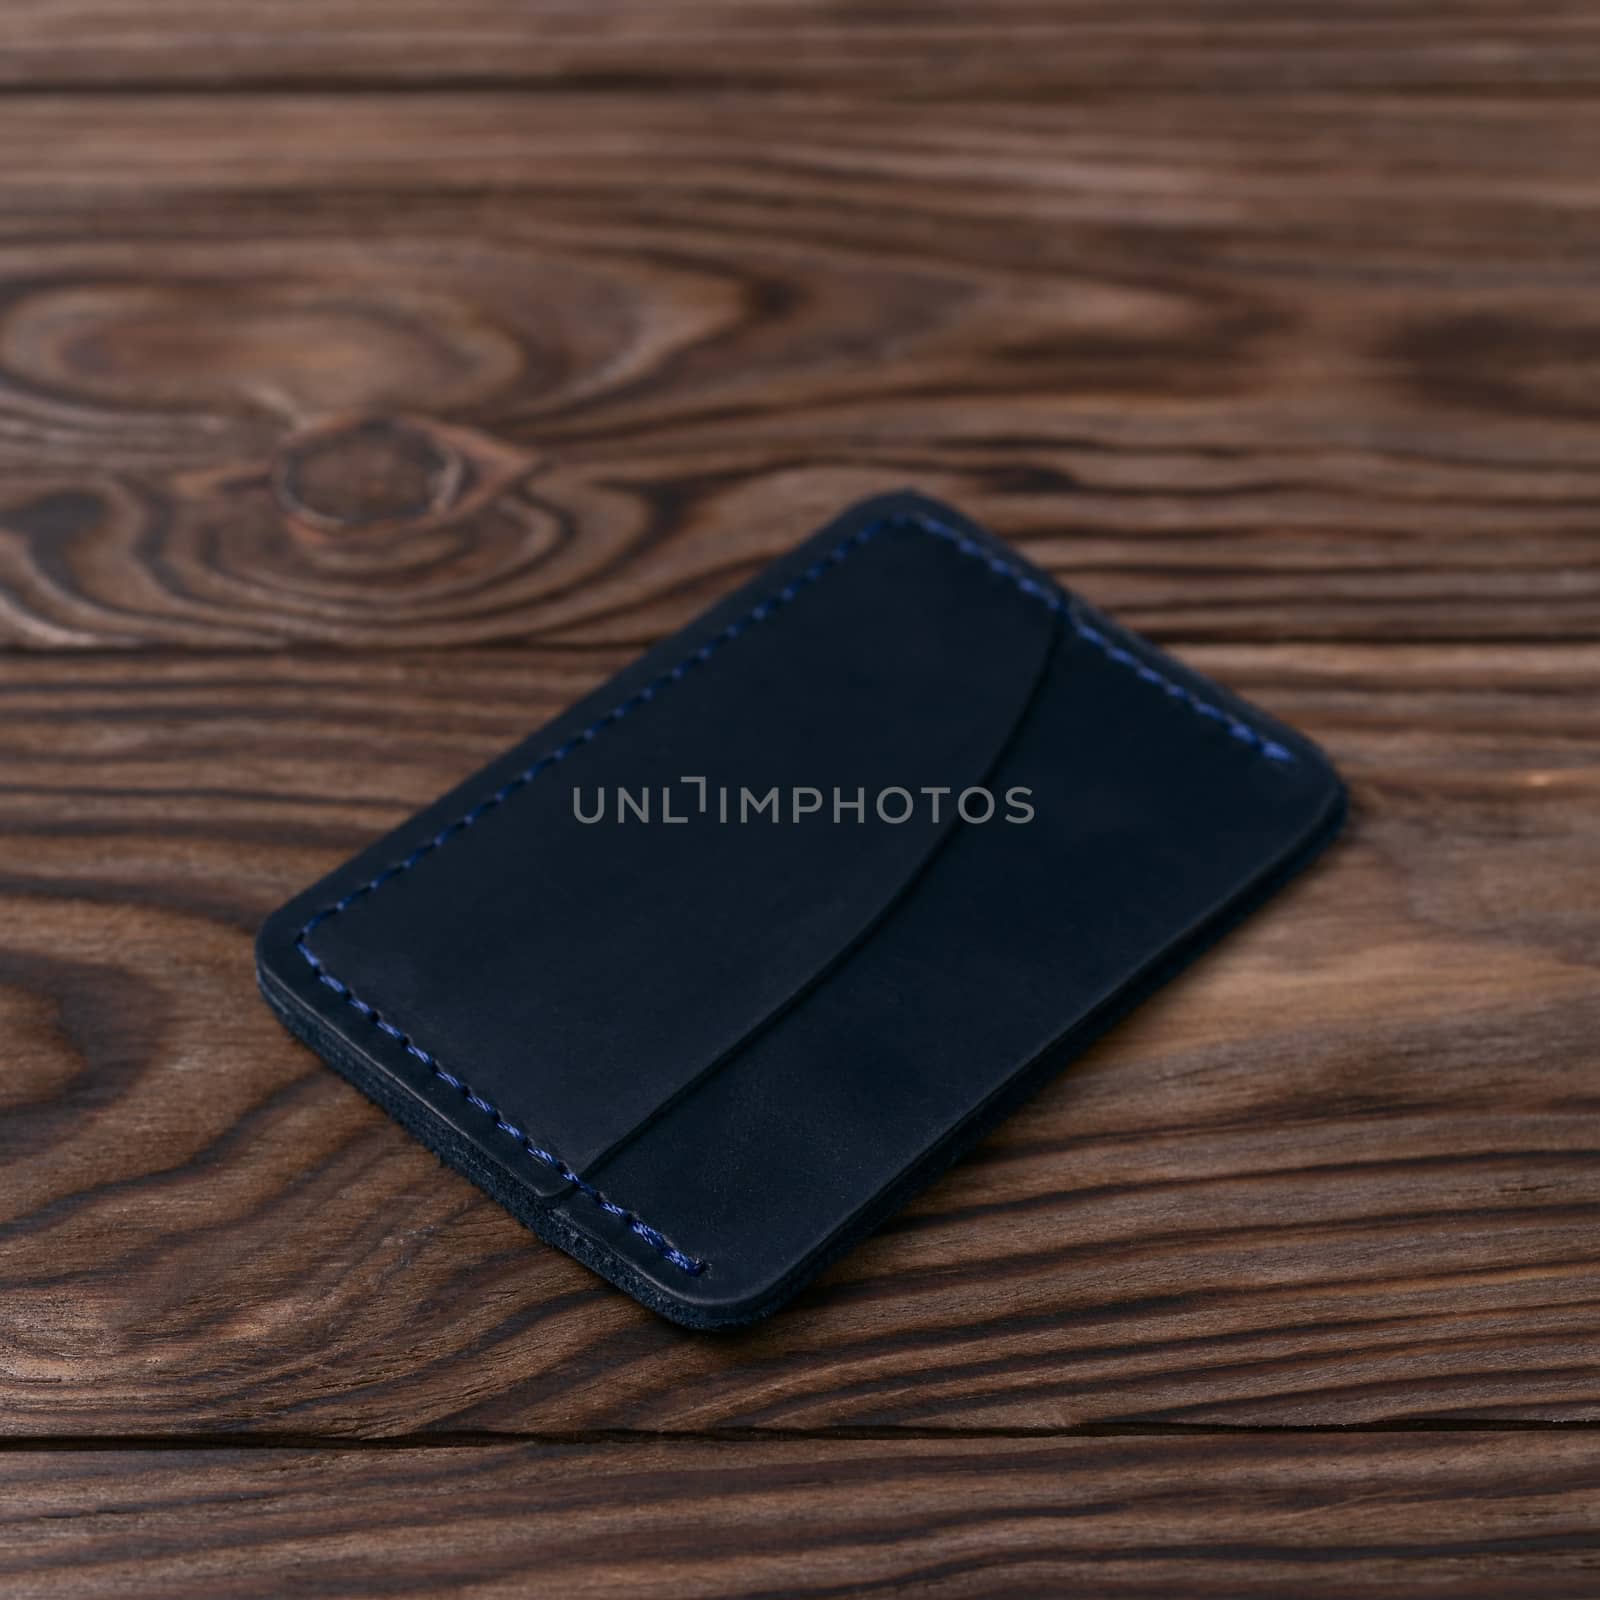 Blue colour handmade leather one pocket cardholder on wooden background. Stock photo with soft blurred background.